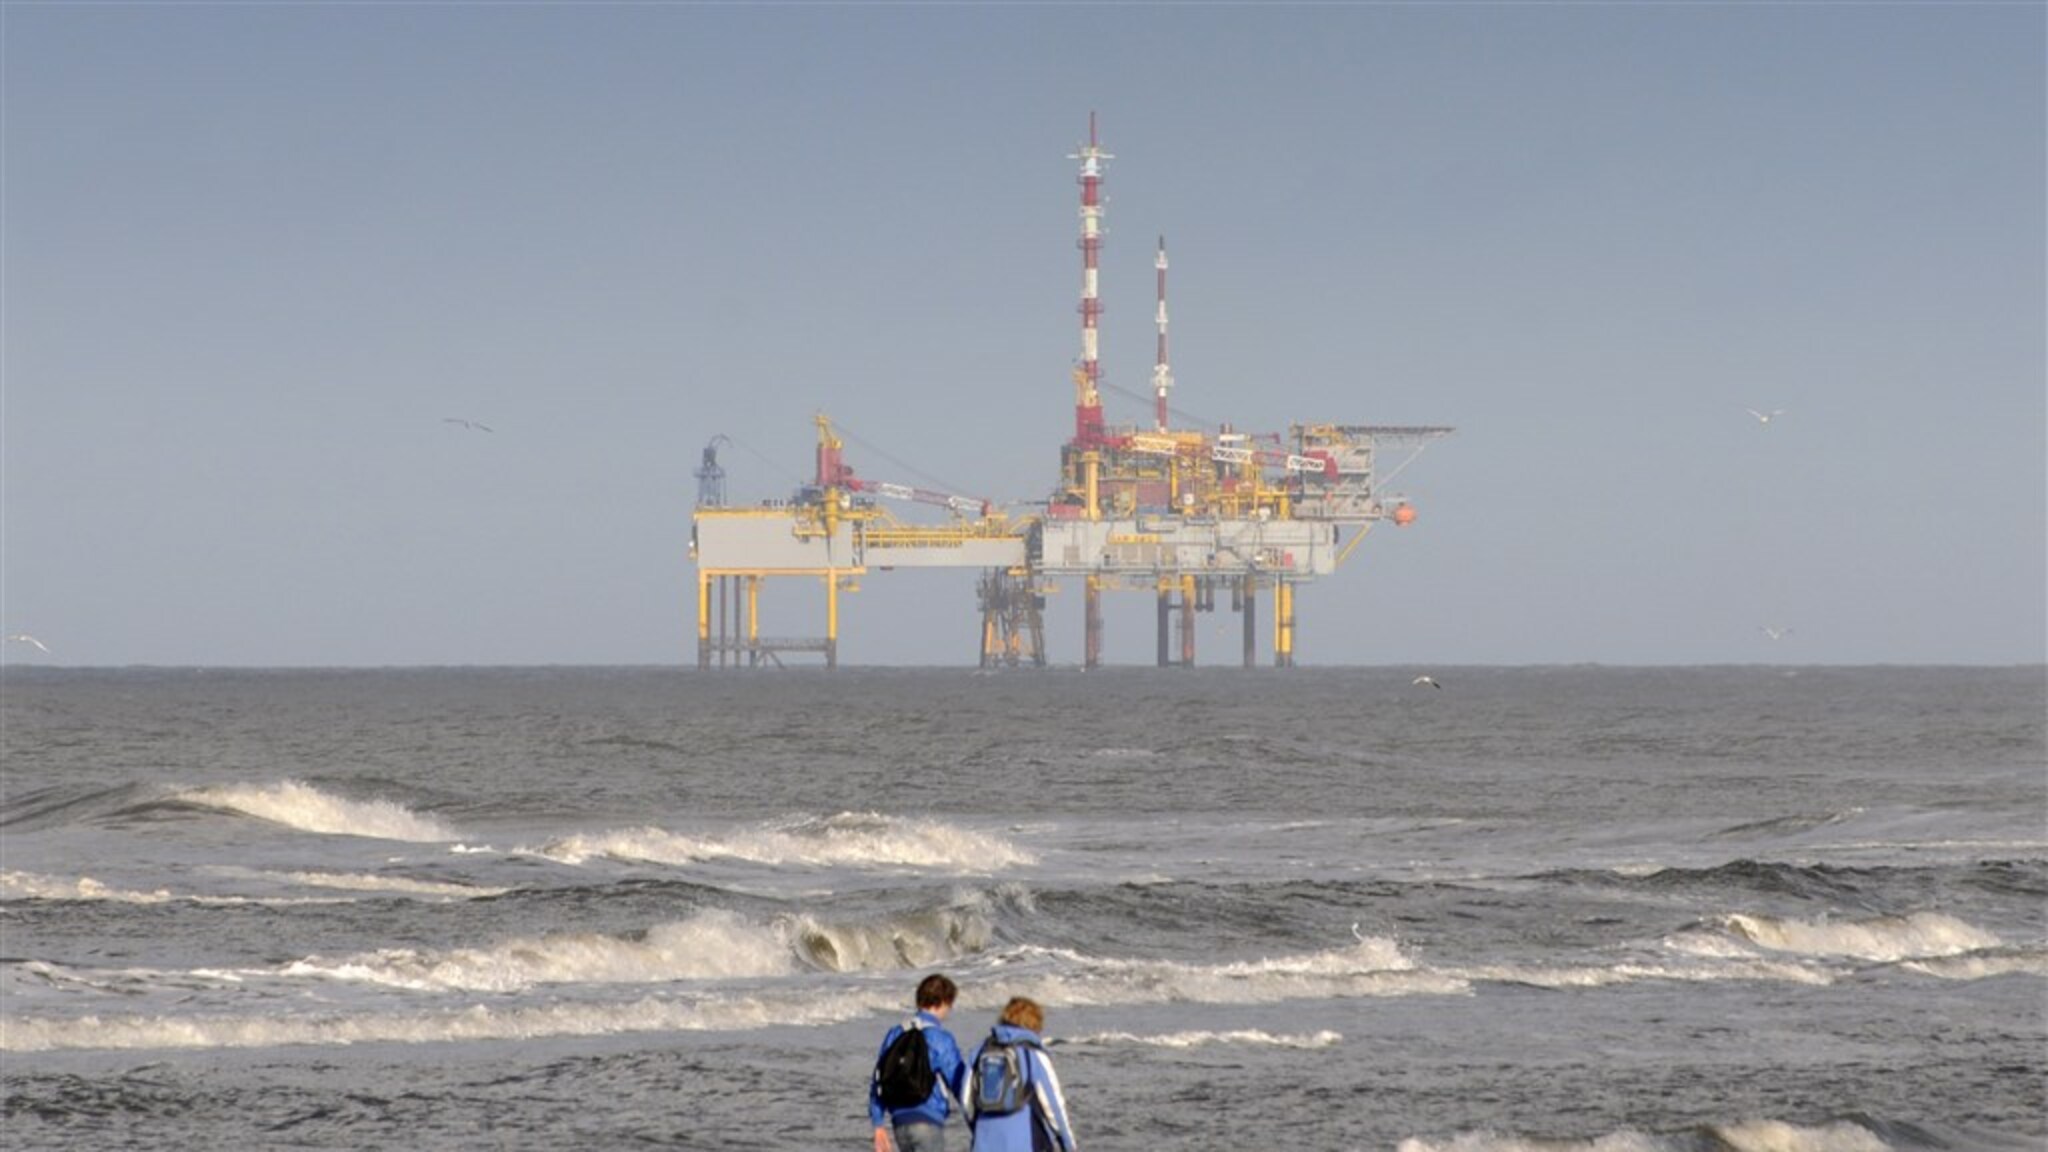 Denmark wants to get more gas from the North Sea